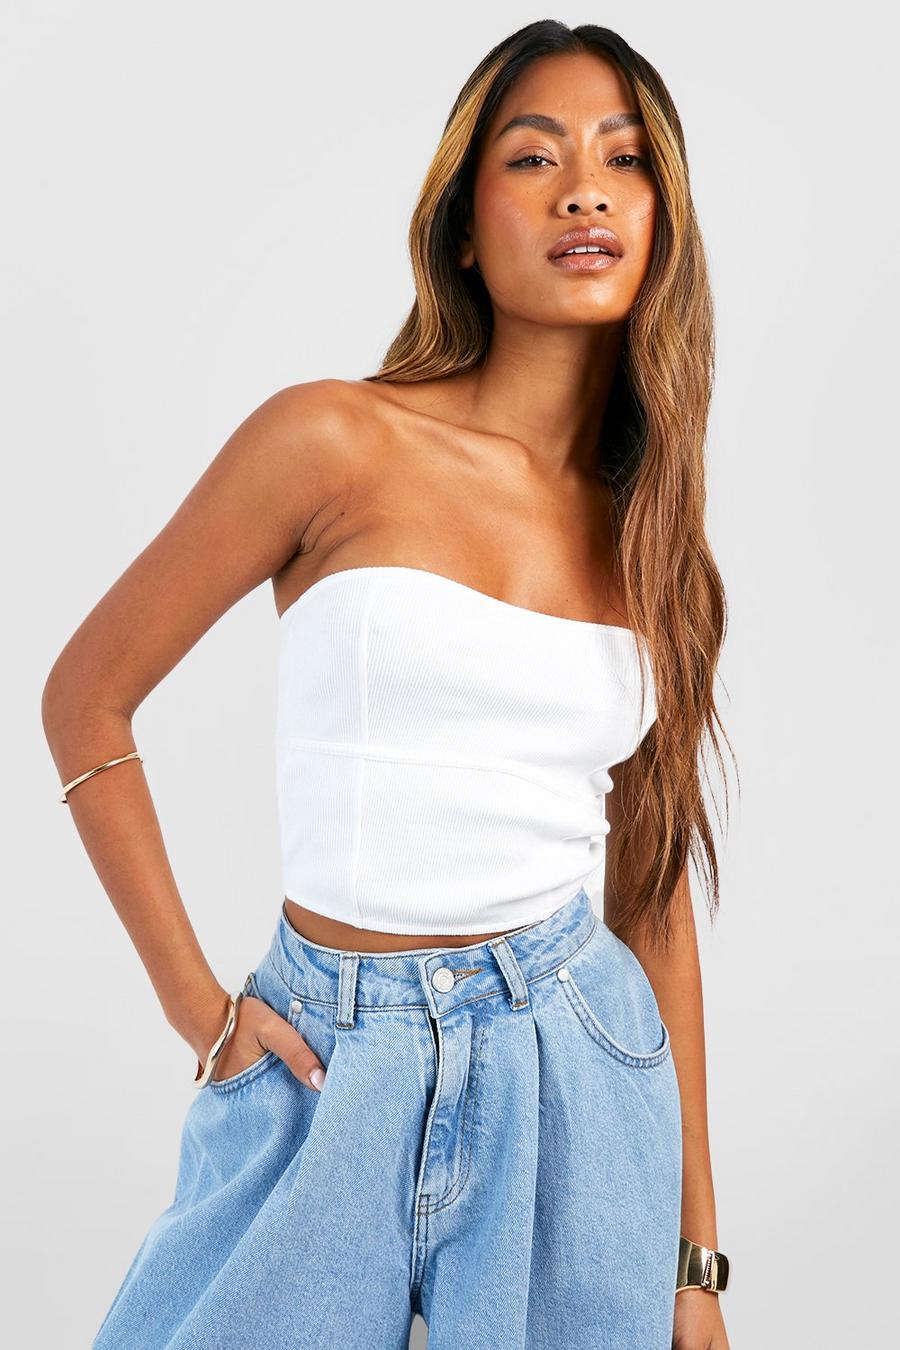 White Crop Top Tube Top Strapless Bandeau Tight Fitting Sexy Top